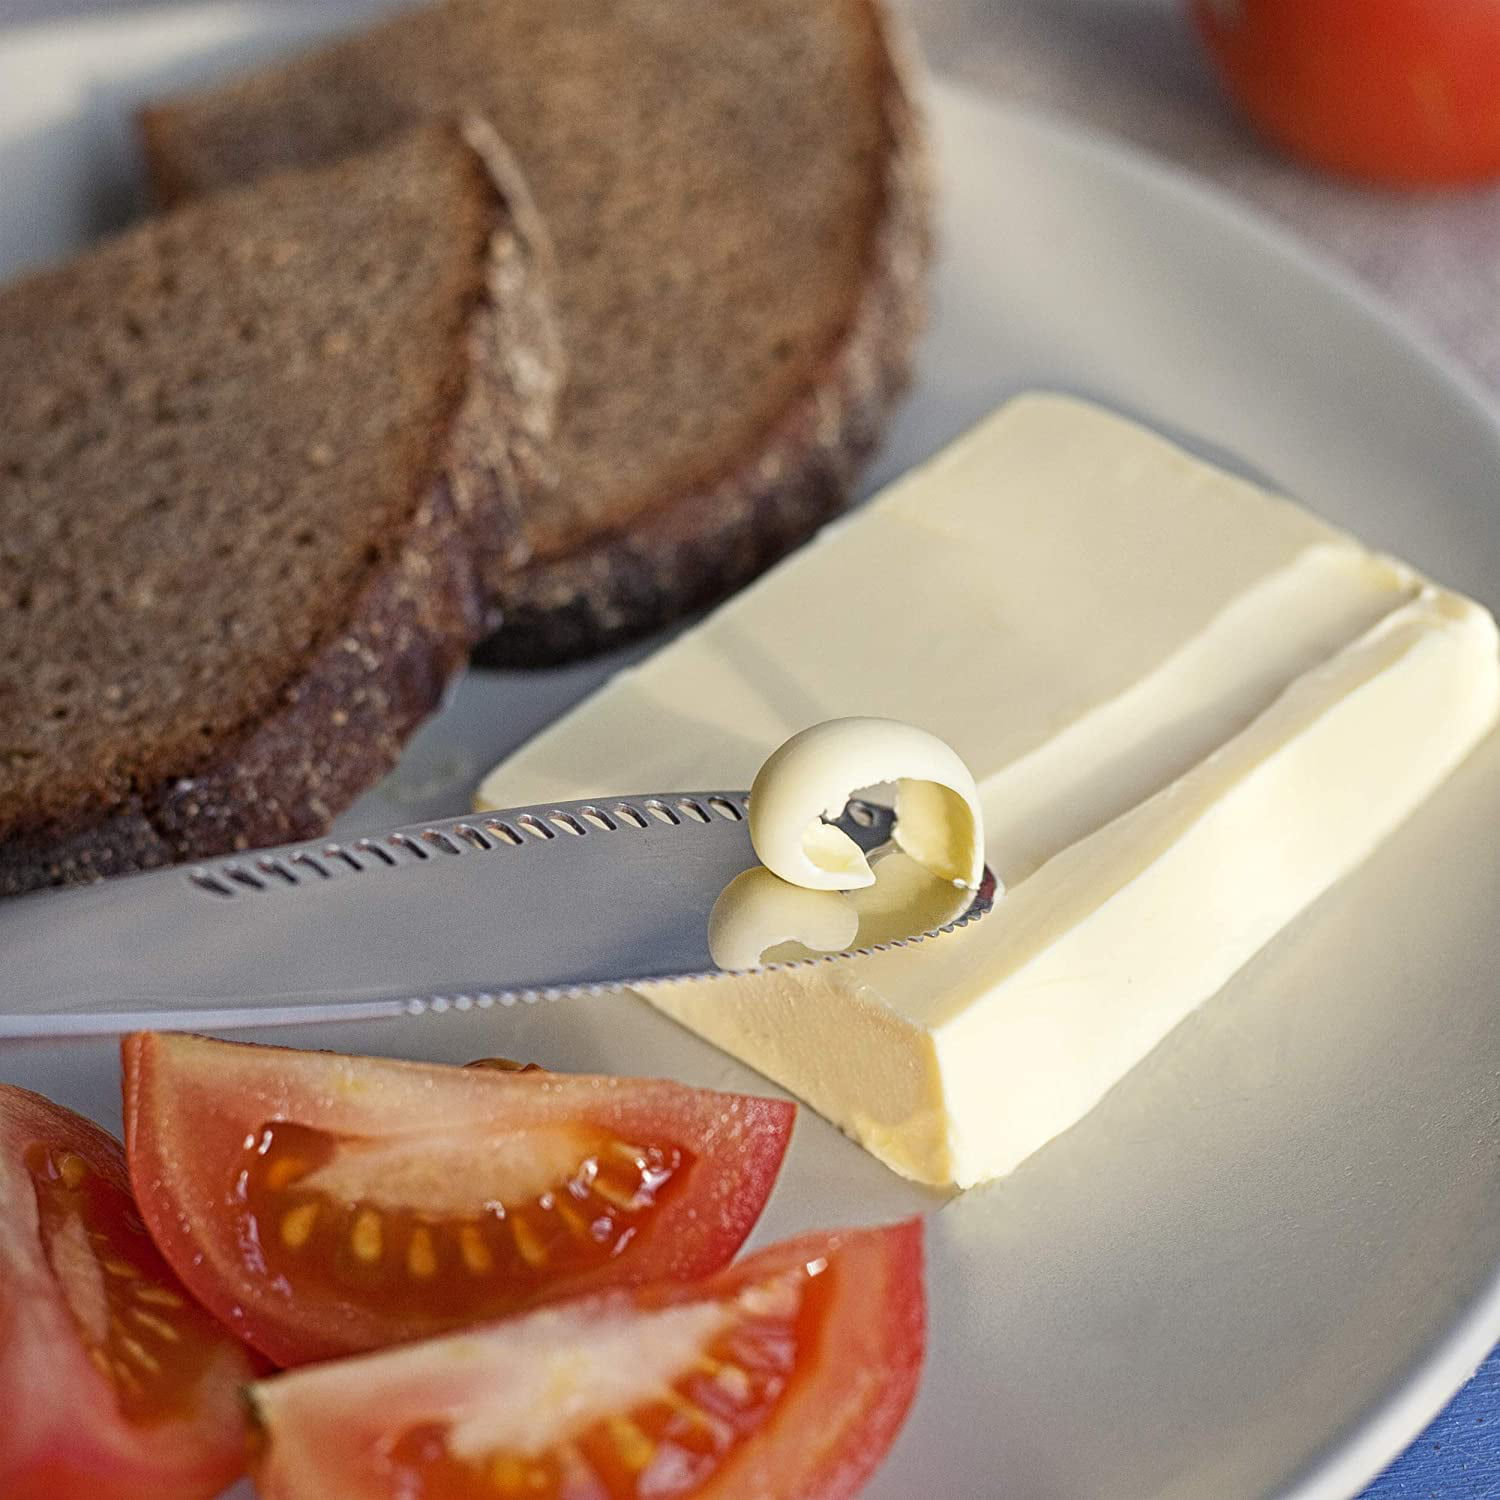 At last! Pre-heated electric butter knife will spread cold butter straight  on to bread